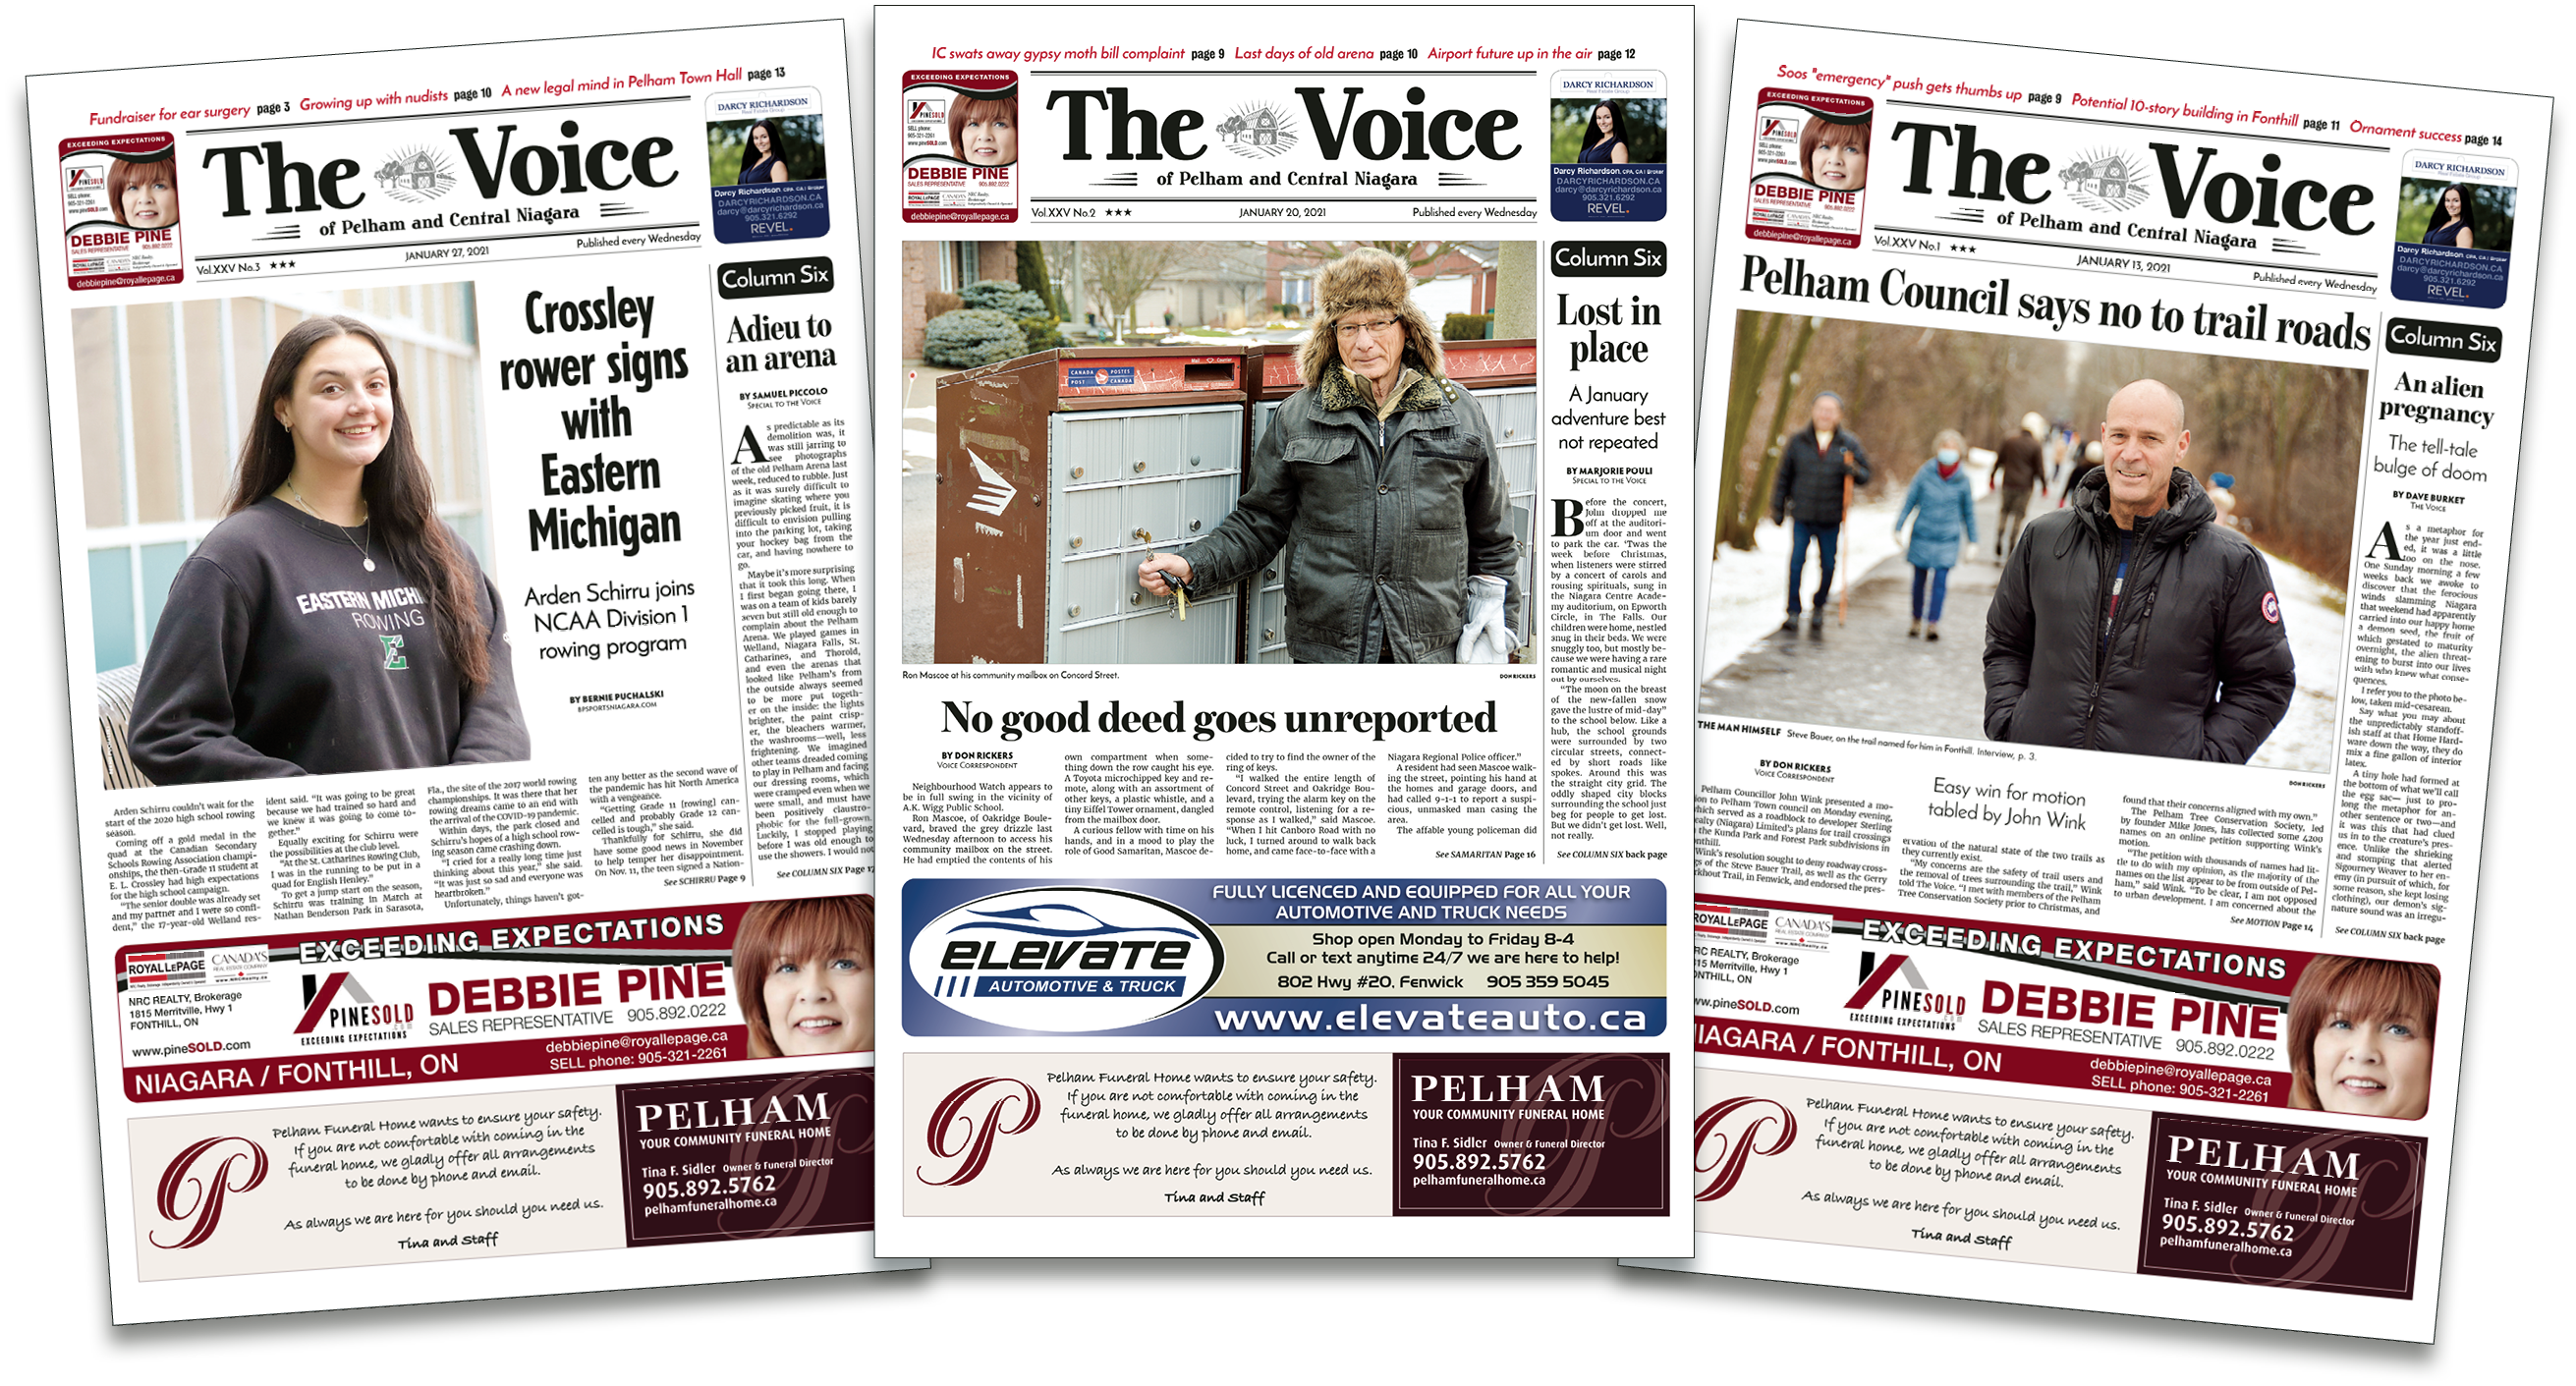 voice of pelham front page image highlighting articles